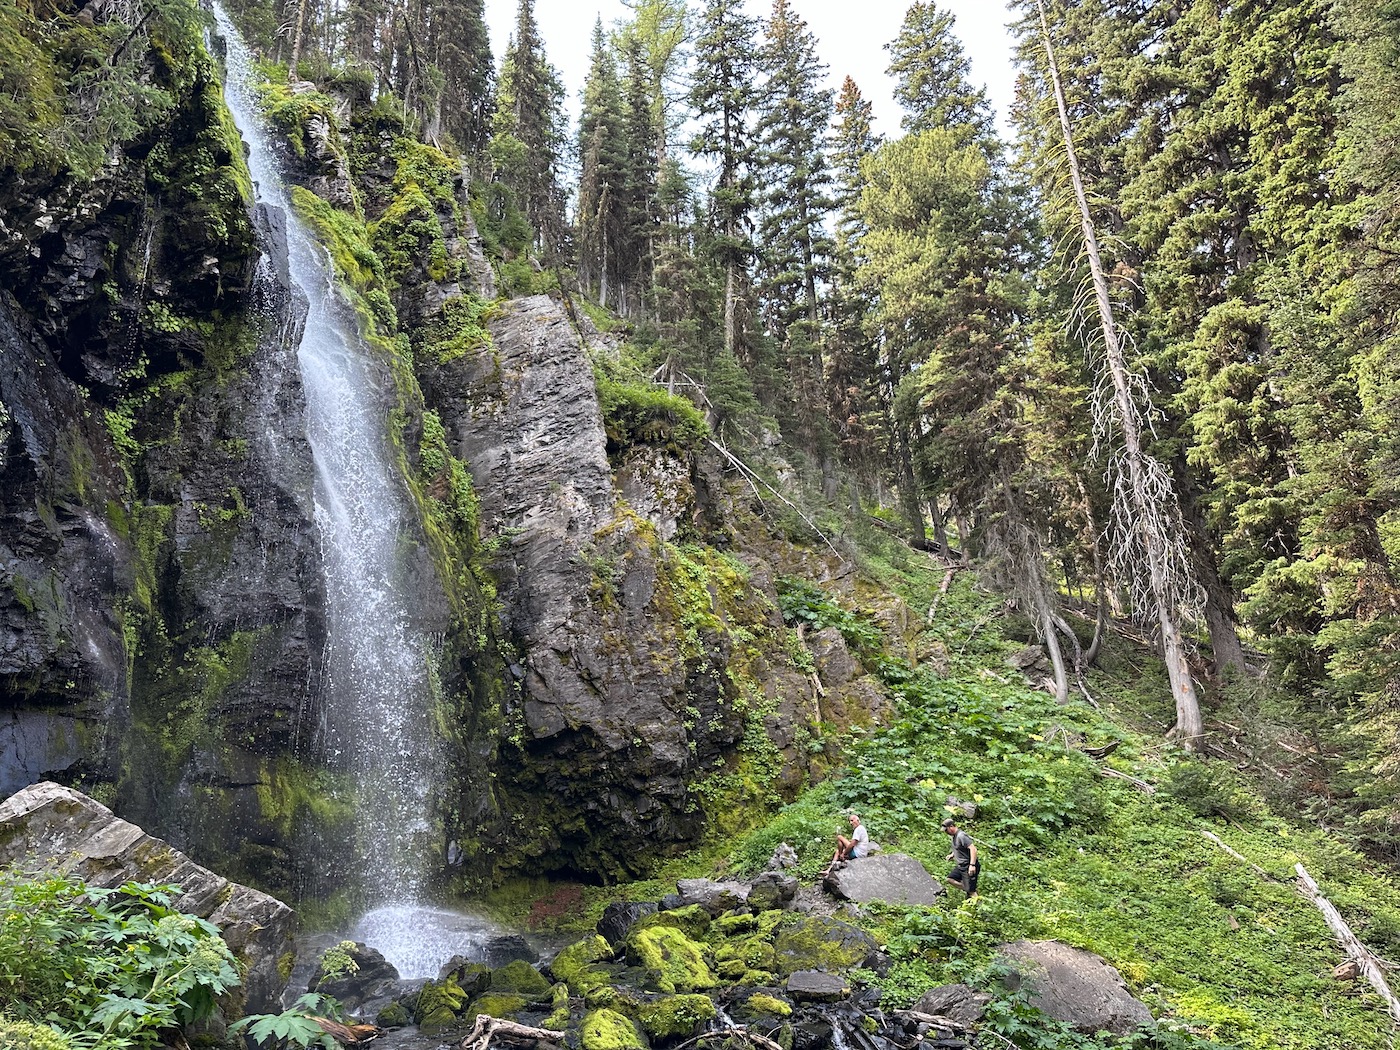 Strawberry Falls, Oregon as viewed from the trail